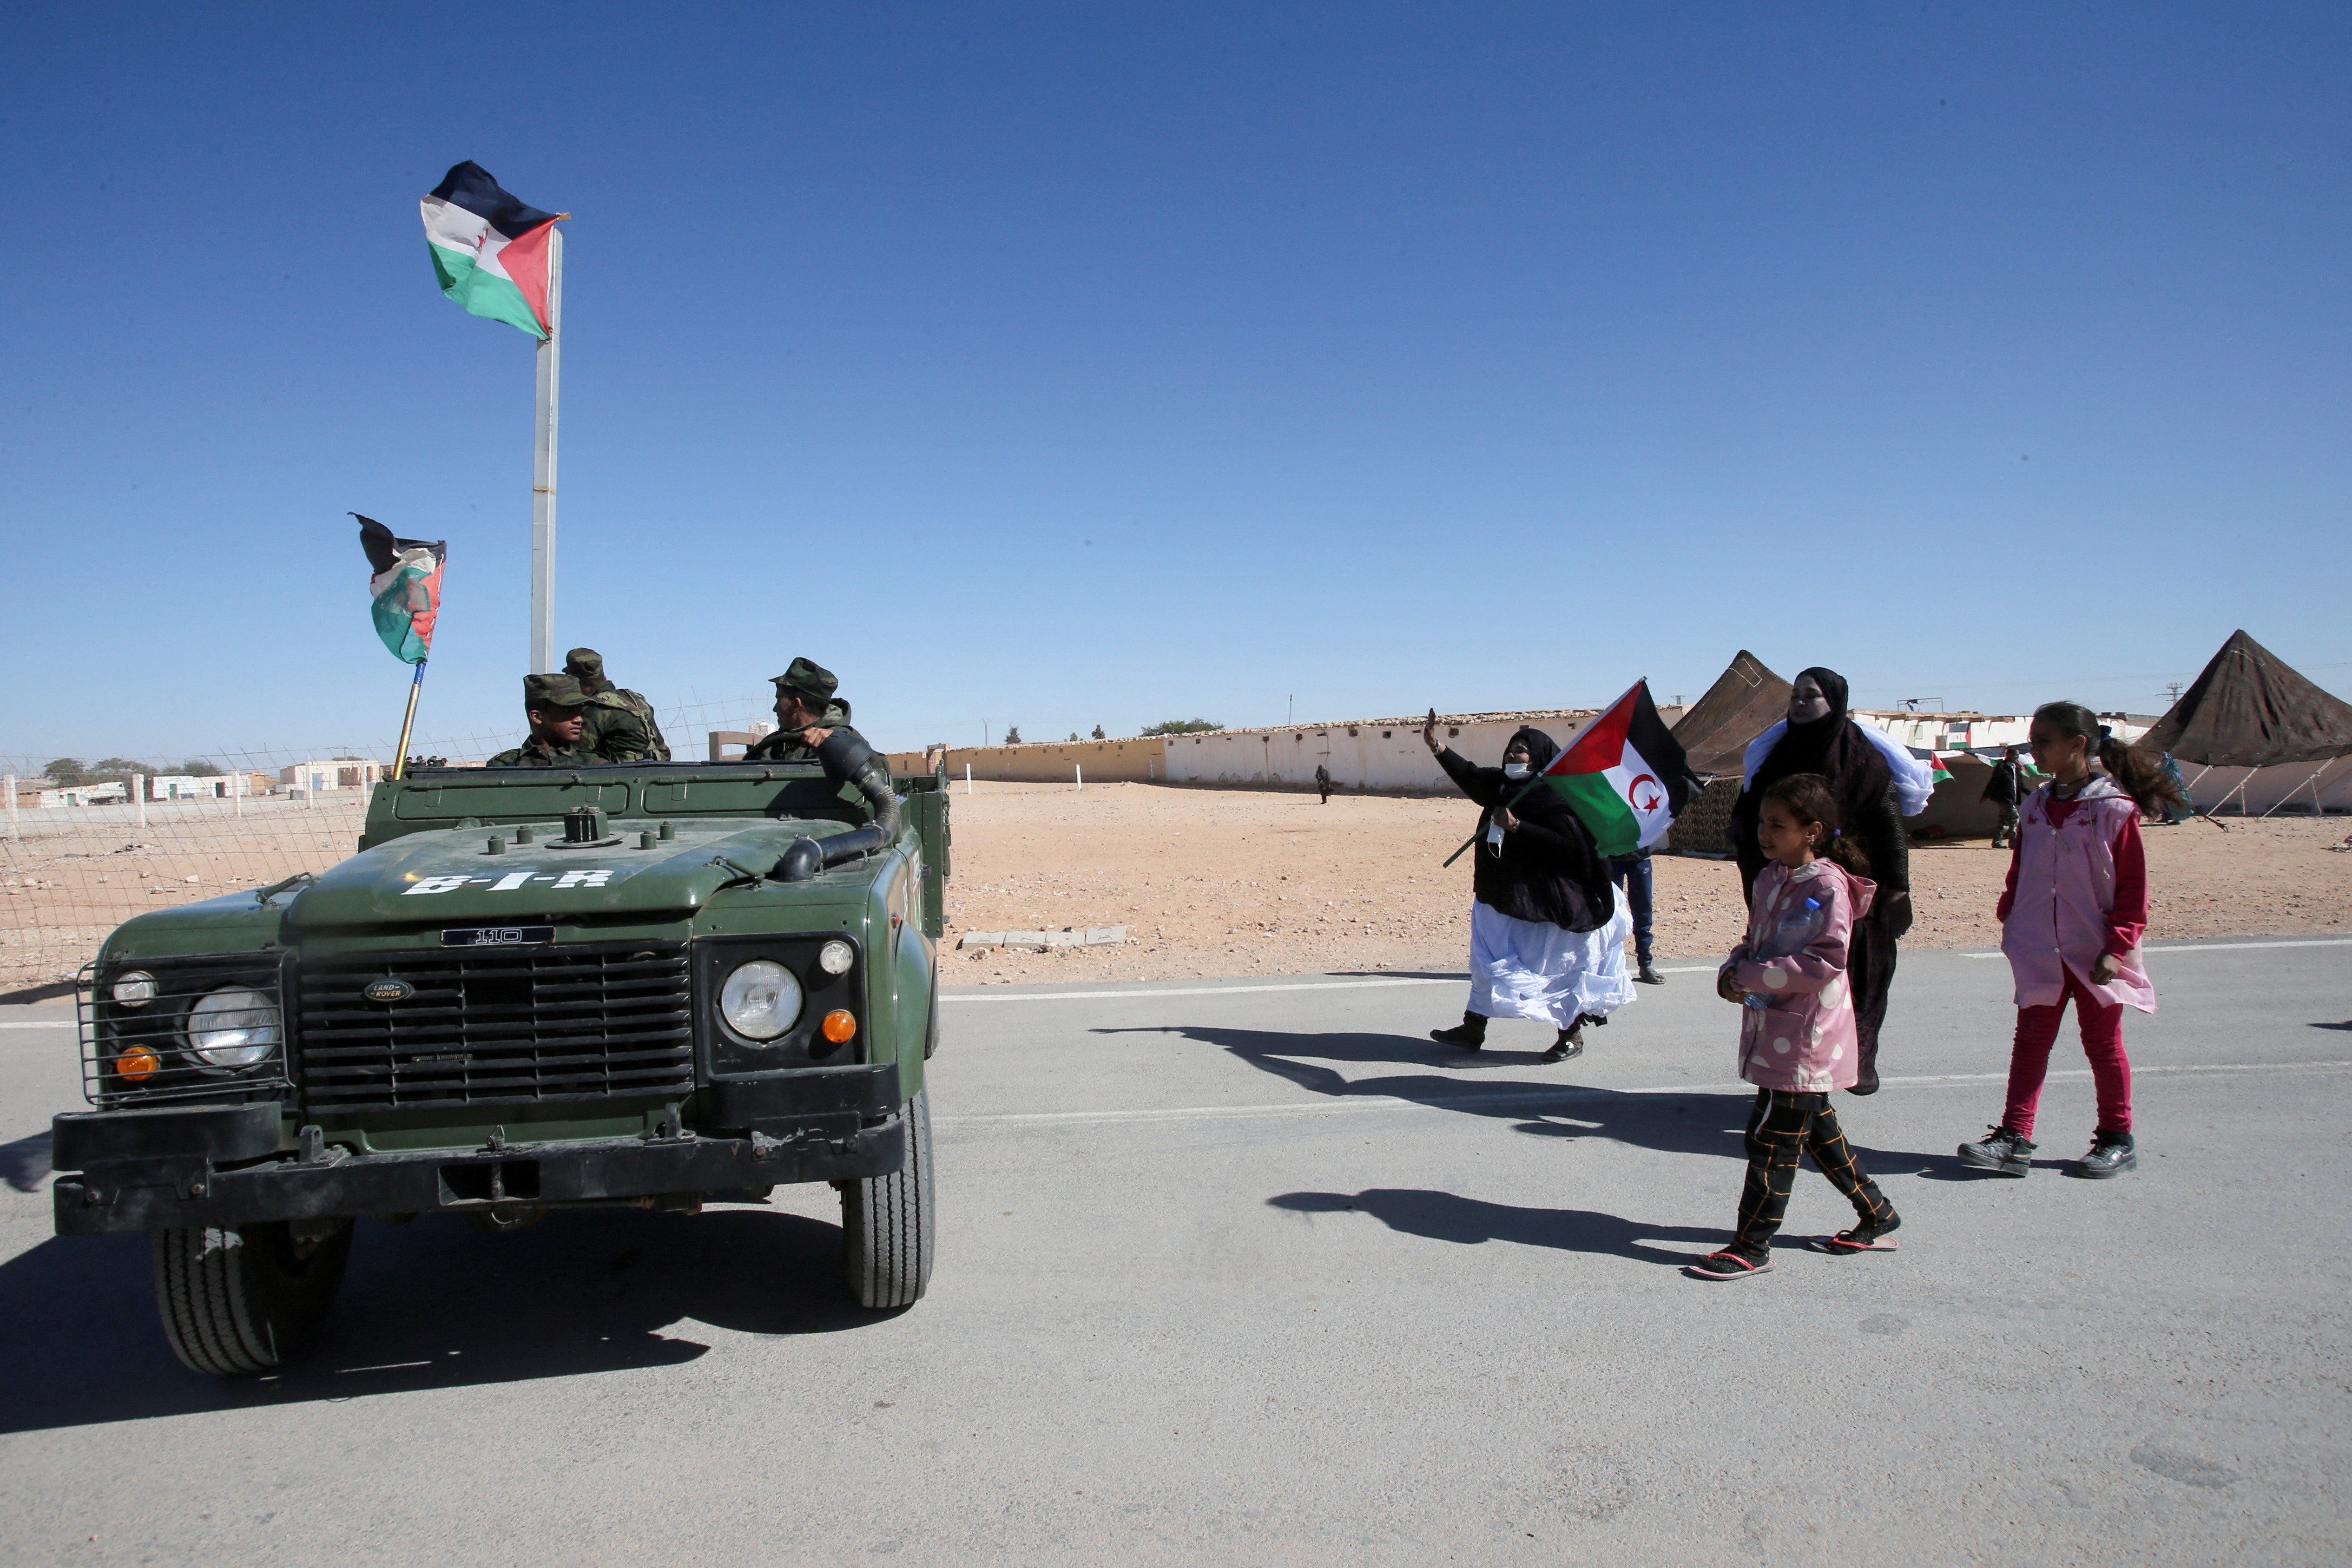 People greet Sahrawi soldiers during the visit of U.N. envoy to Western Sahara Staffan de Mistura to a refugee camp in Tindouf